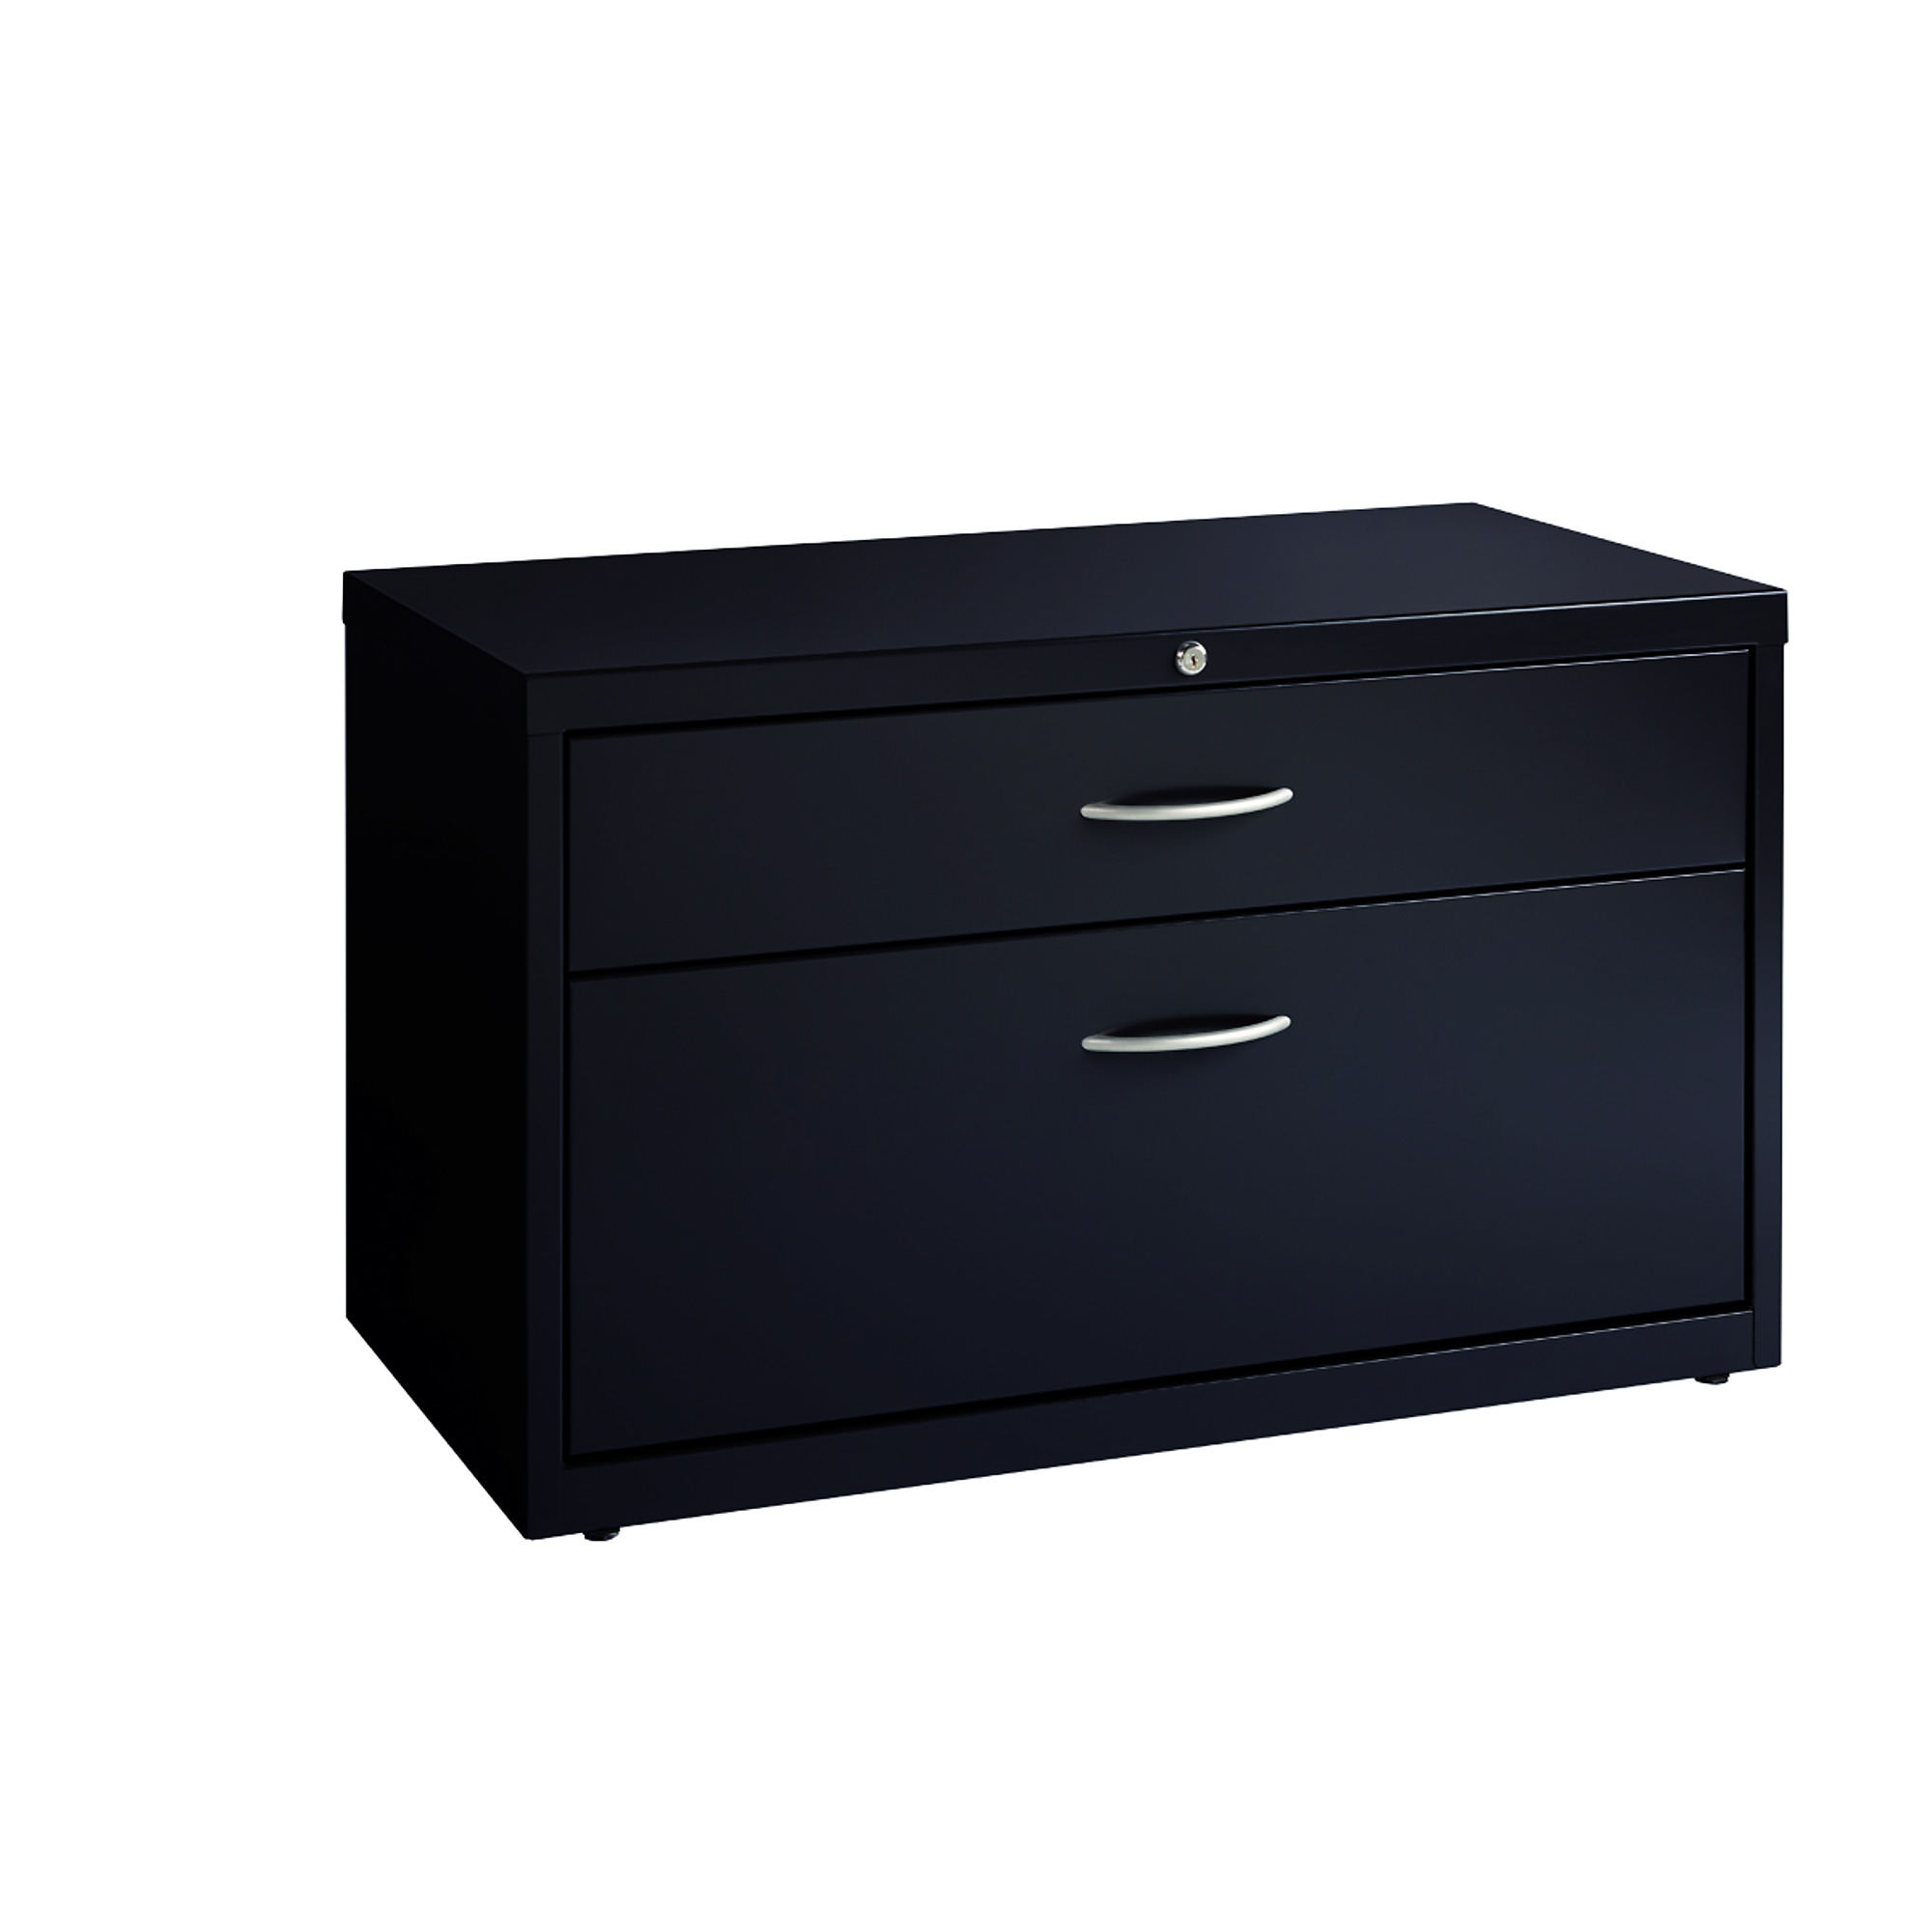 Hirsh Industries, 2 Drawer Credenza Lateral File Cabinet, Width 36 in, Depth 18.625 in, Height 22 in, Model 20504